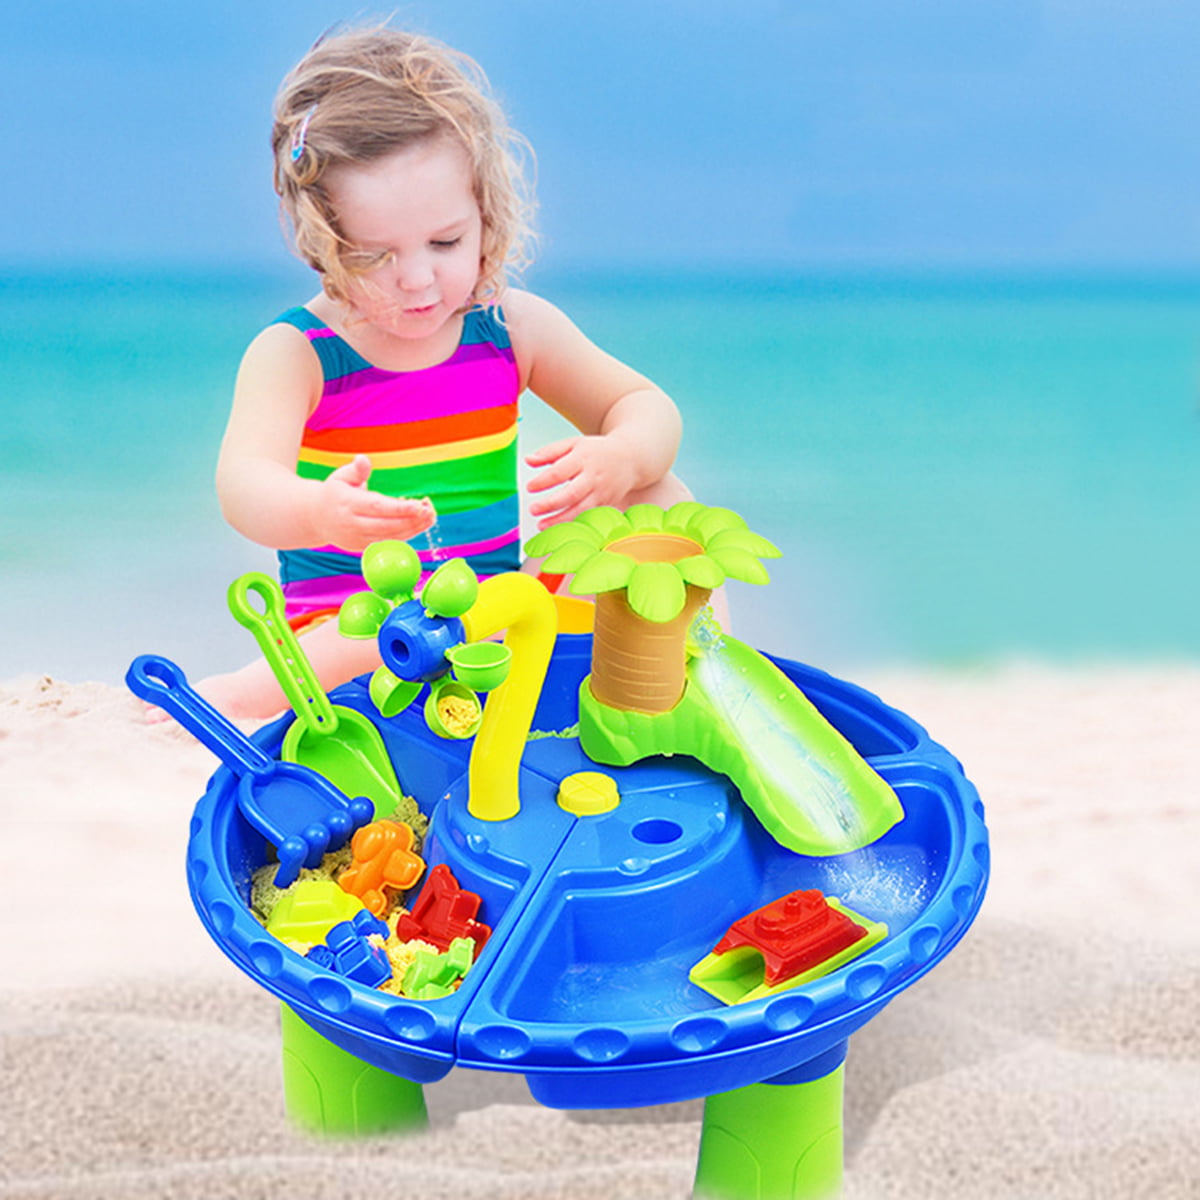 Large Pirate Ship Table Sandglass Playset Multicolor Children Sensory Table Beach Toys Activity Table Set for Toddlers Water Tables for Play Room Square Sand Table 